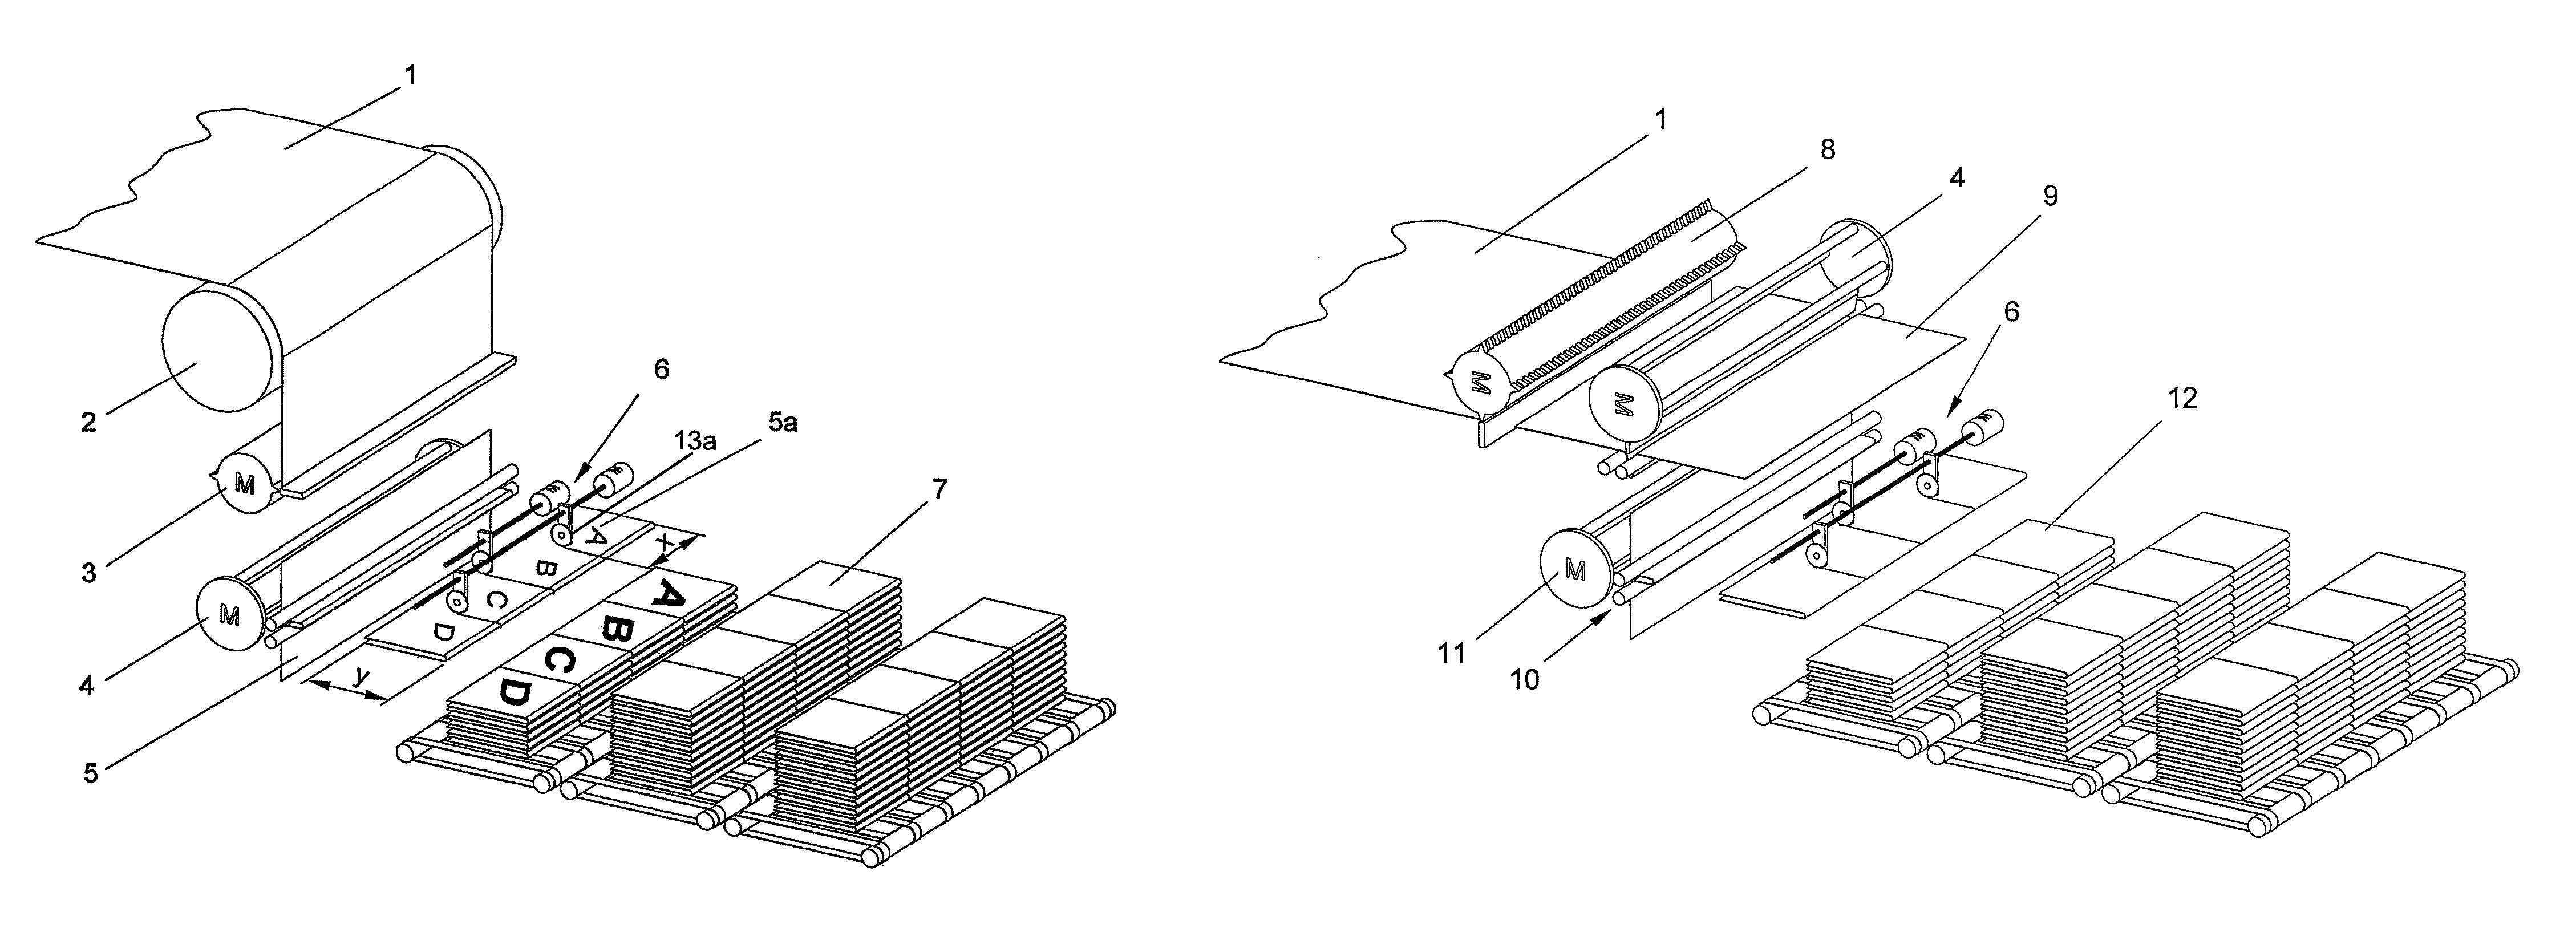 Method for producing a printed product